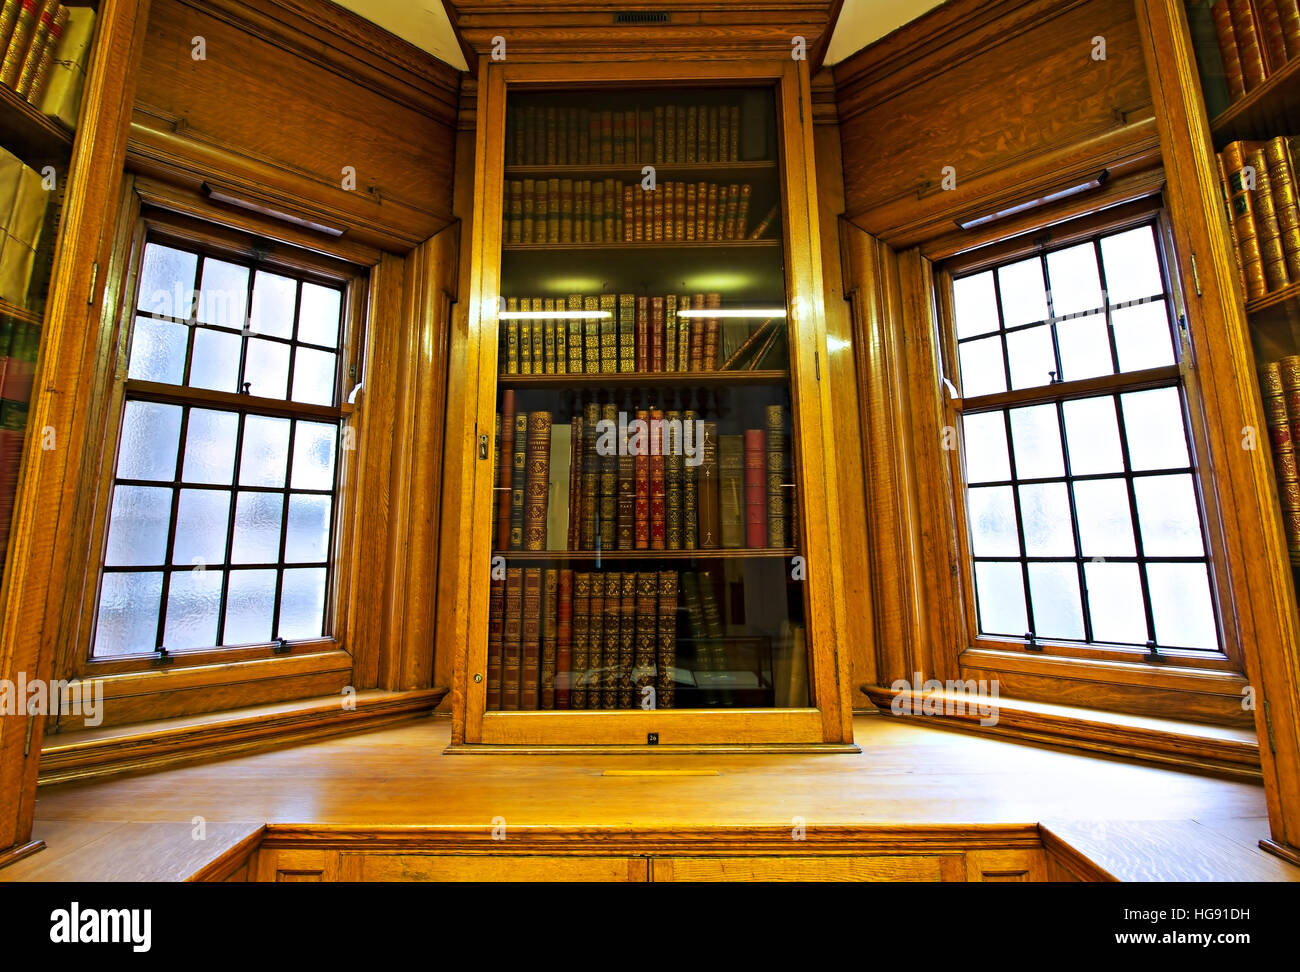 Hornby Library room inside Liverpool Central Library Stock Photo